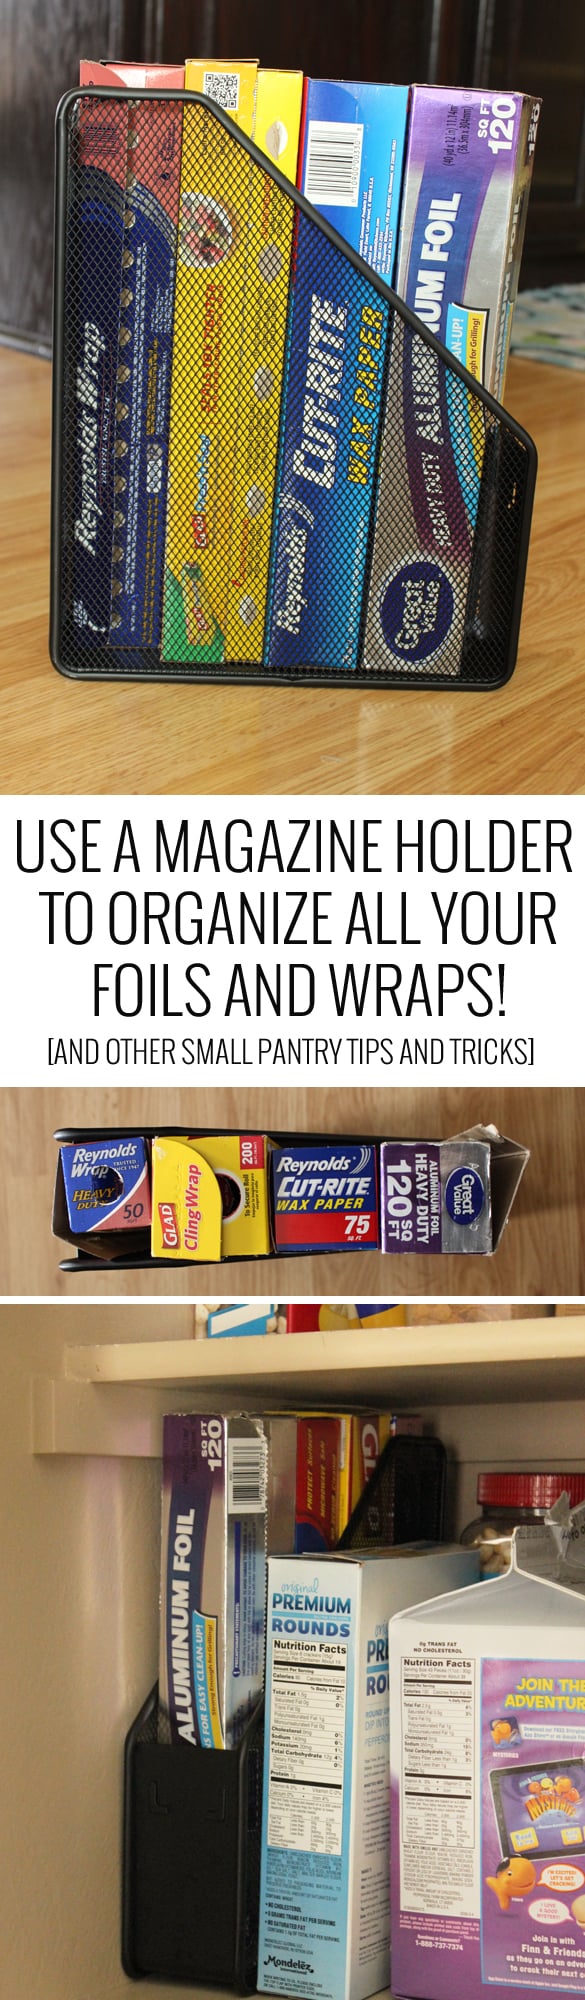 Use a magazine holder to organize all your foils and wraps! (And other awesome small pantry tips and tricks!)